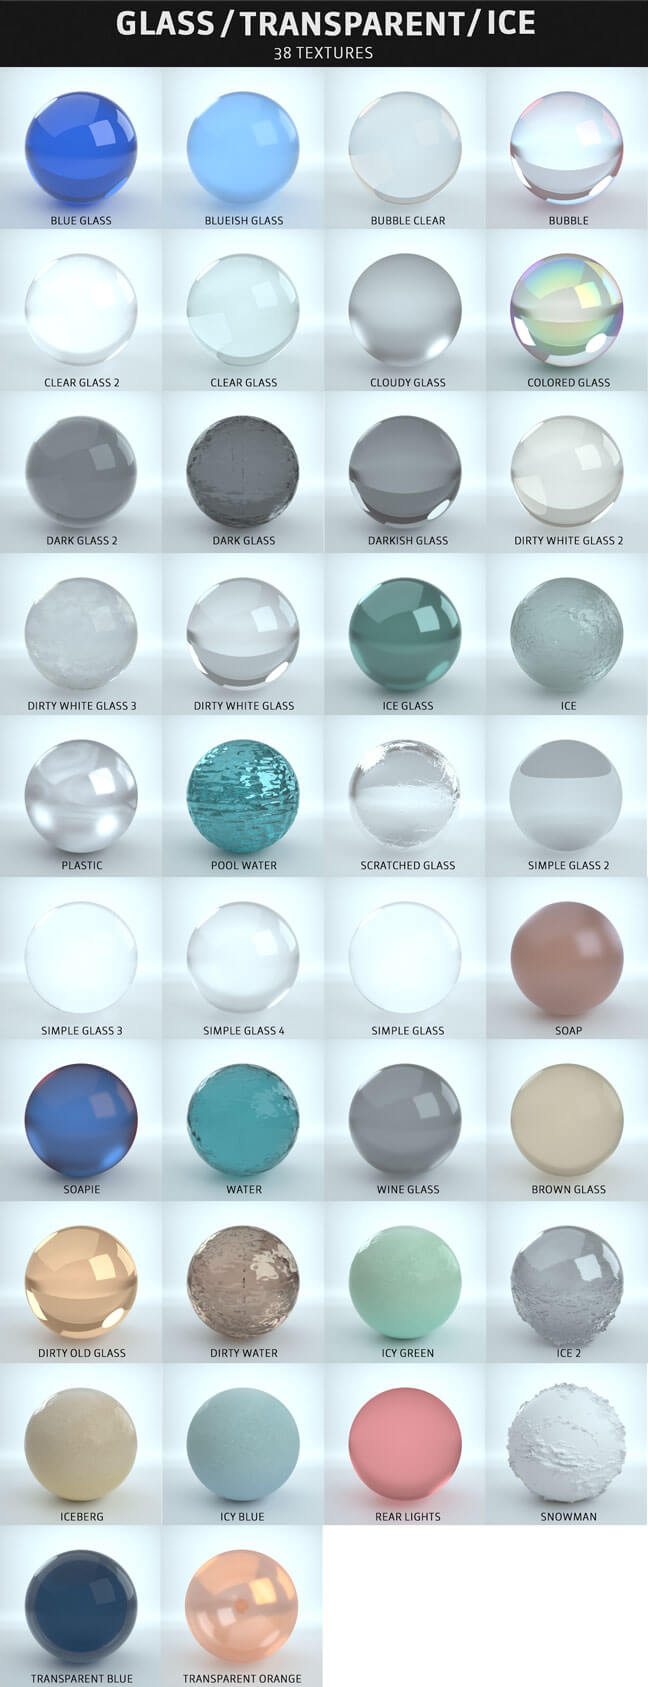 C4D-Otoy-Octane-Render-Material-Textures-Pack-Glass-Transparent-Ice